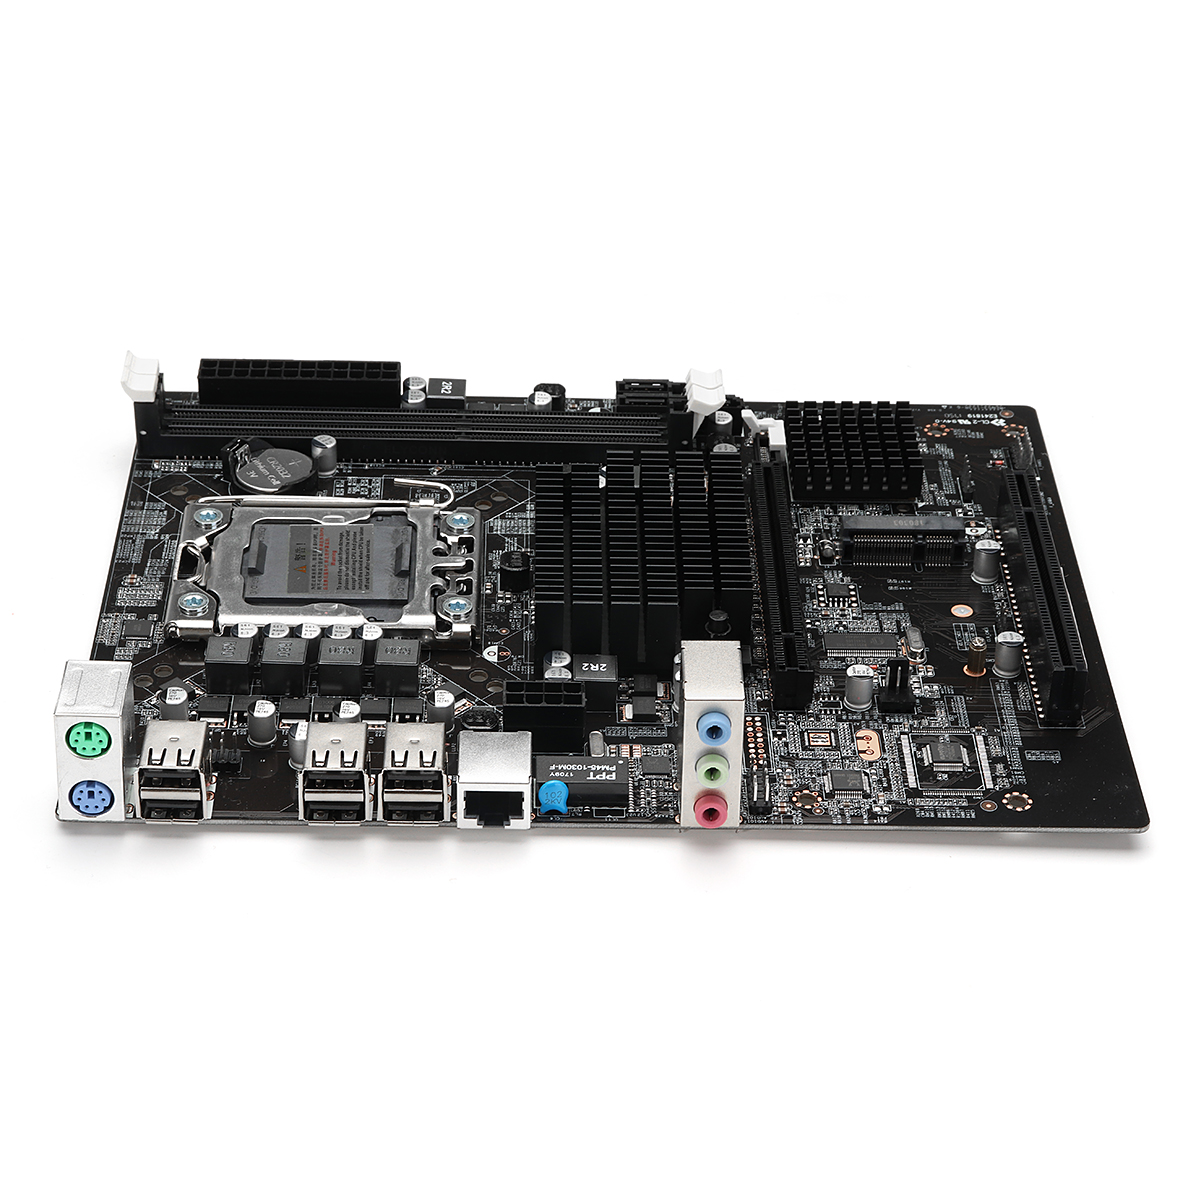 Motherboard support. X58 Chipset.